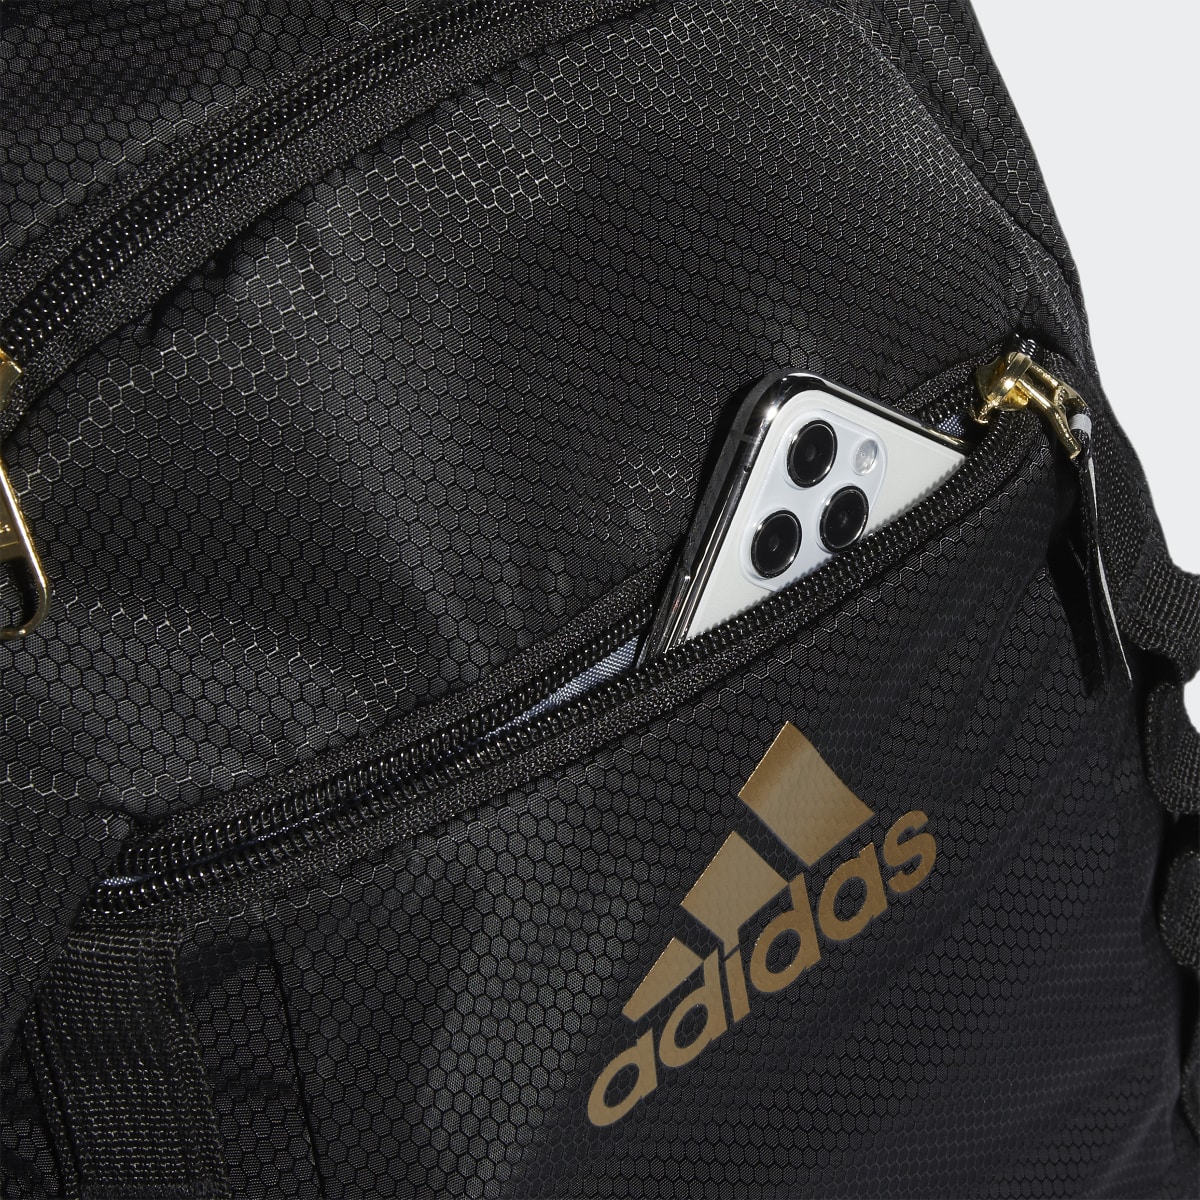 Adidas Excel Backpack. 7